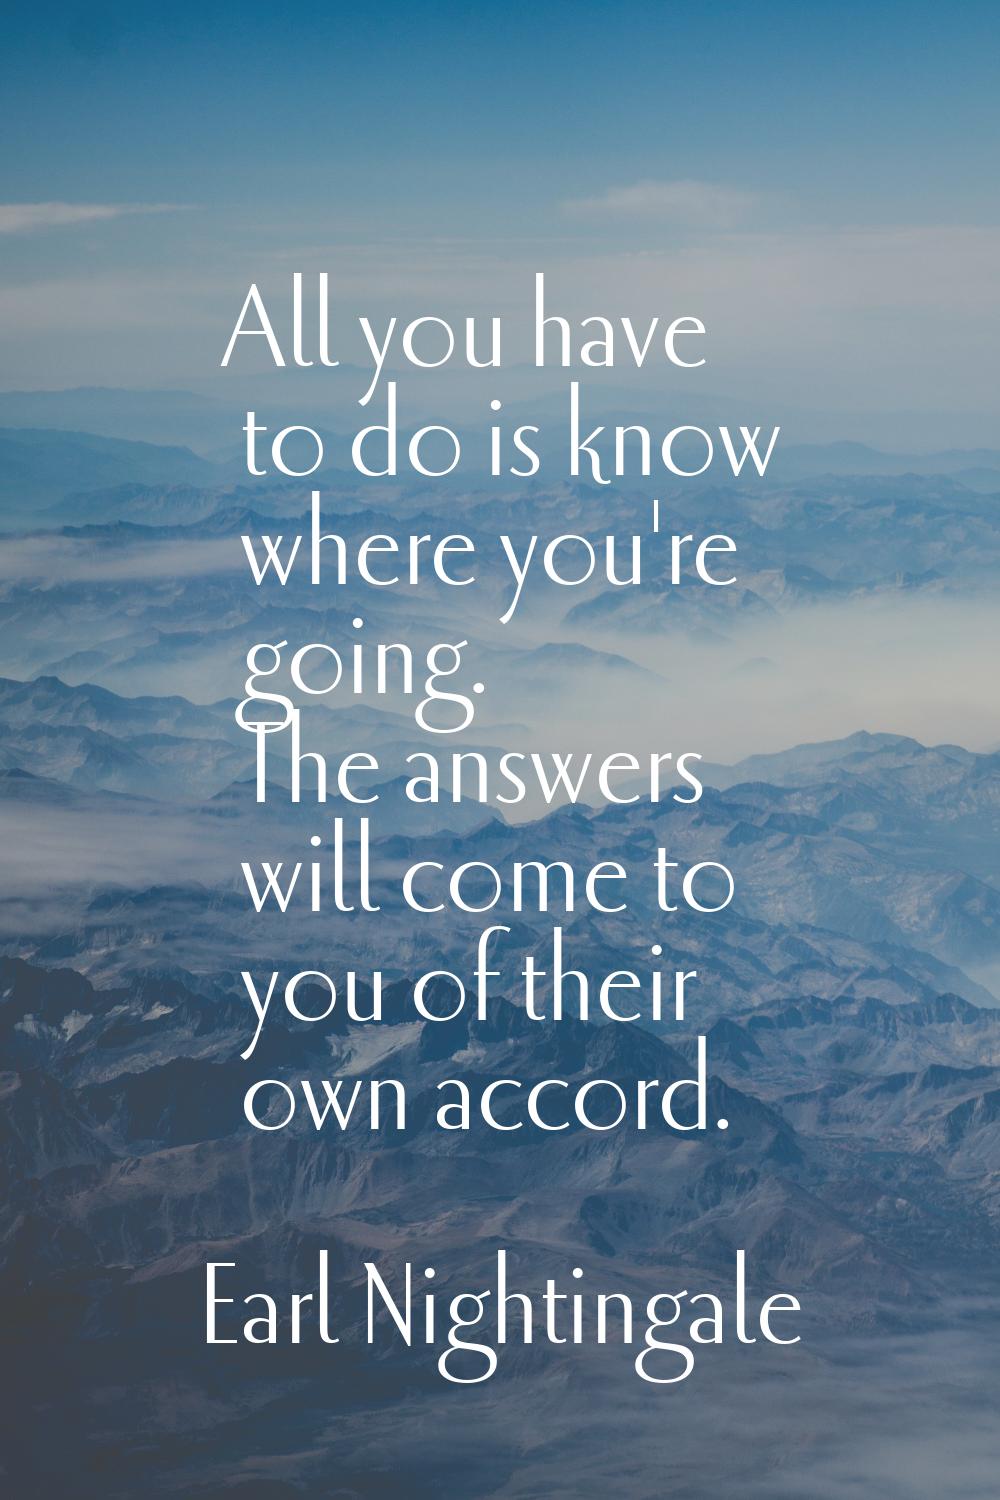 All you have to do is know where you're going. The answers will come to you of their own accord.